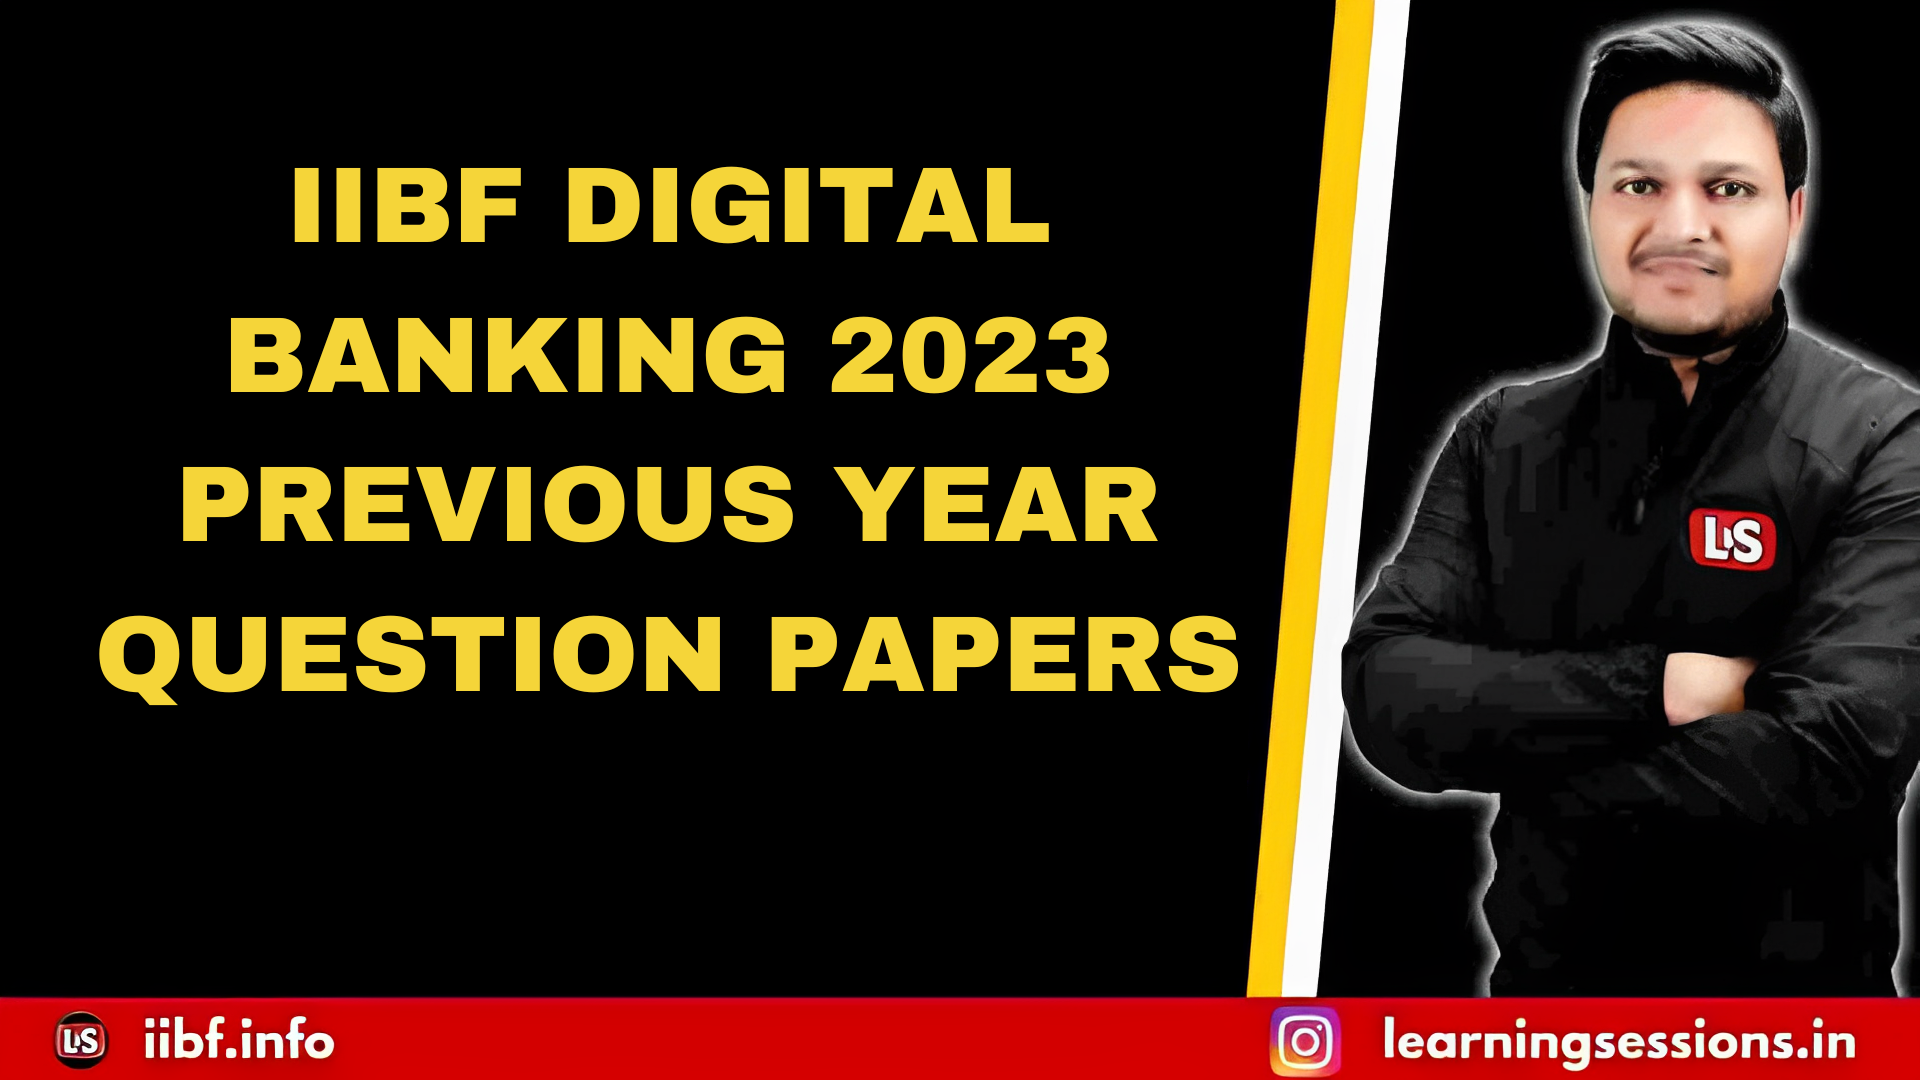 IIBF DIGITAL BANKING 2023 PREVIOUS YEAR QUESTION PAPERS